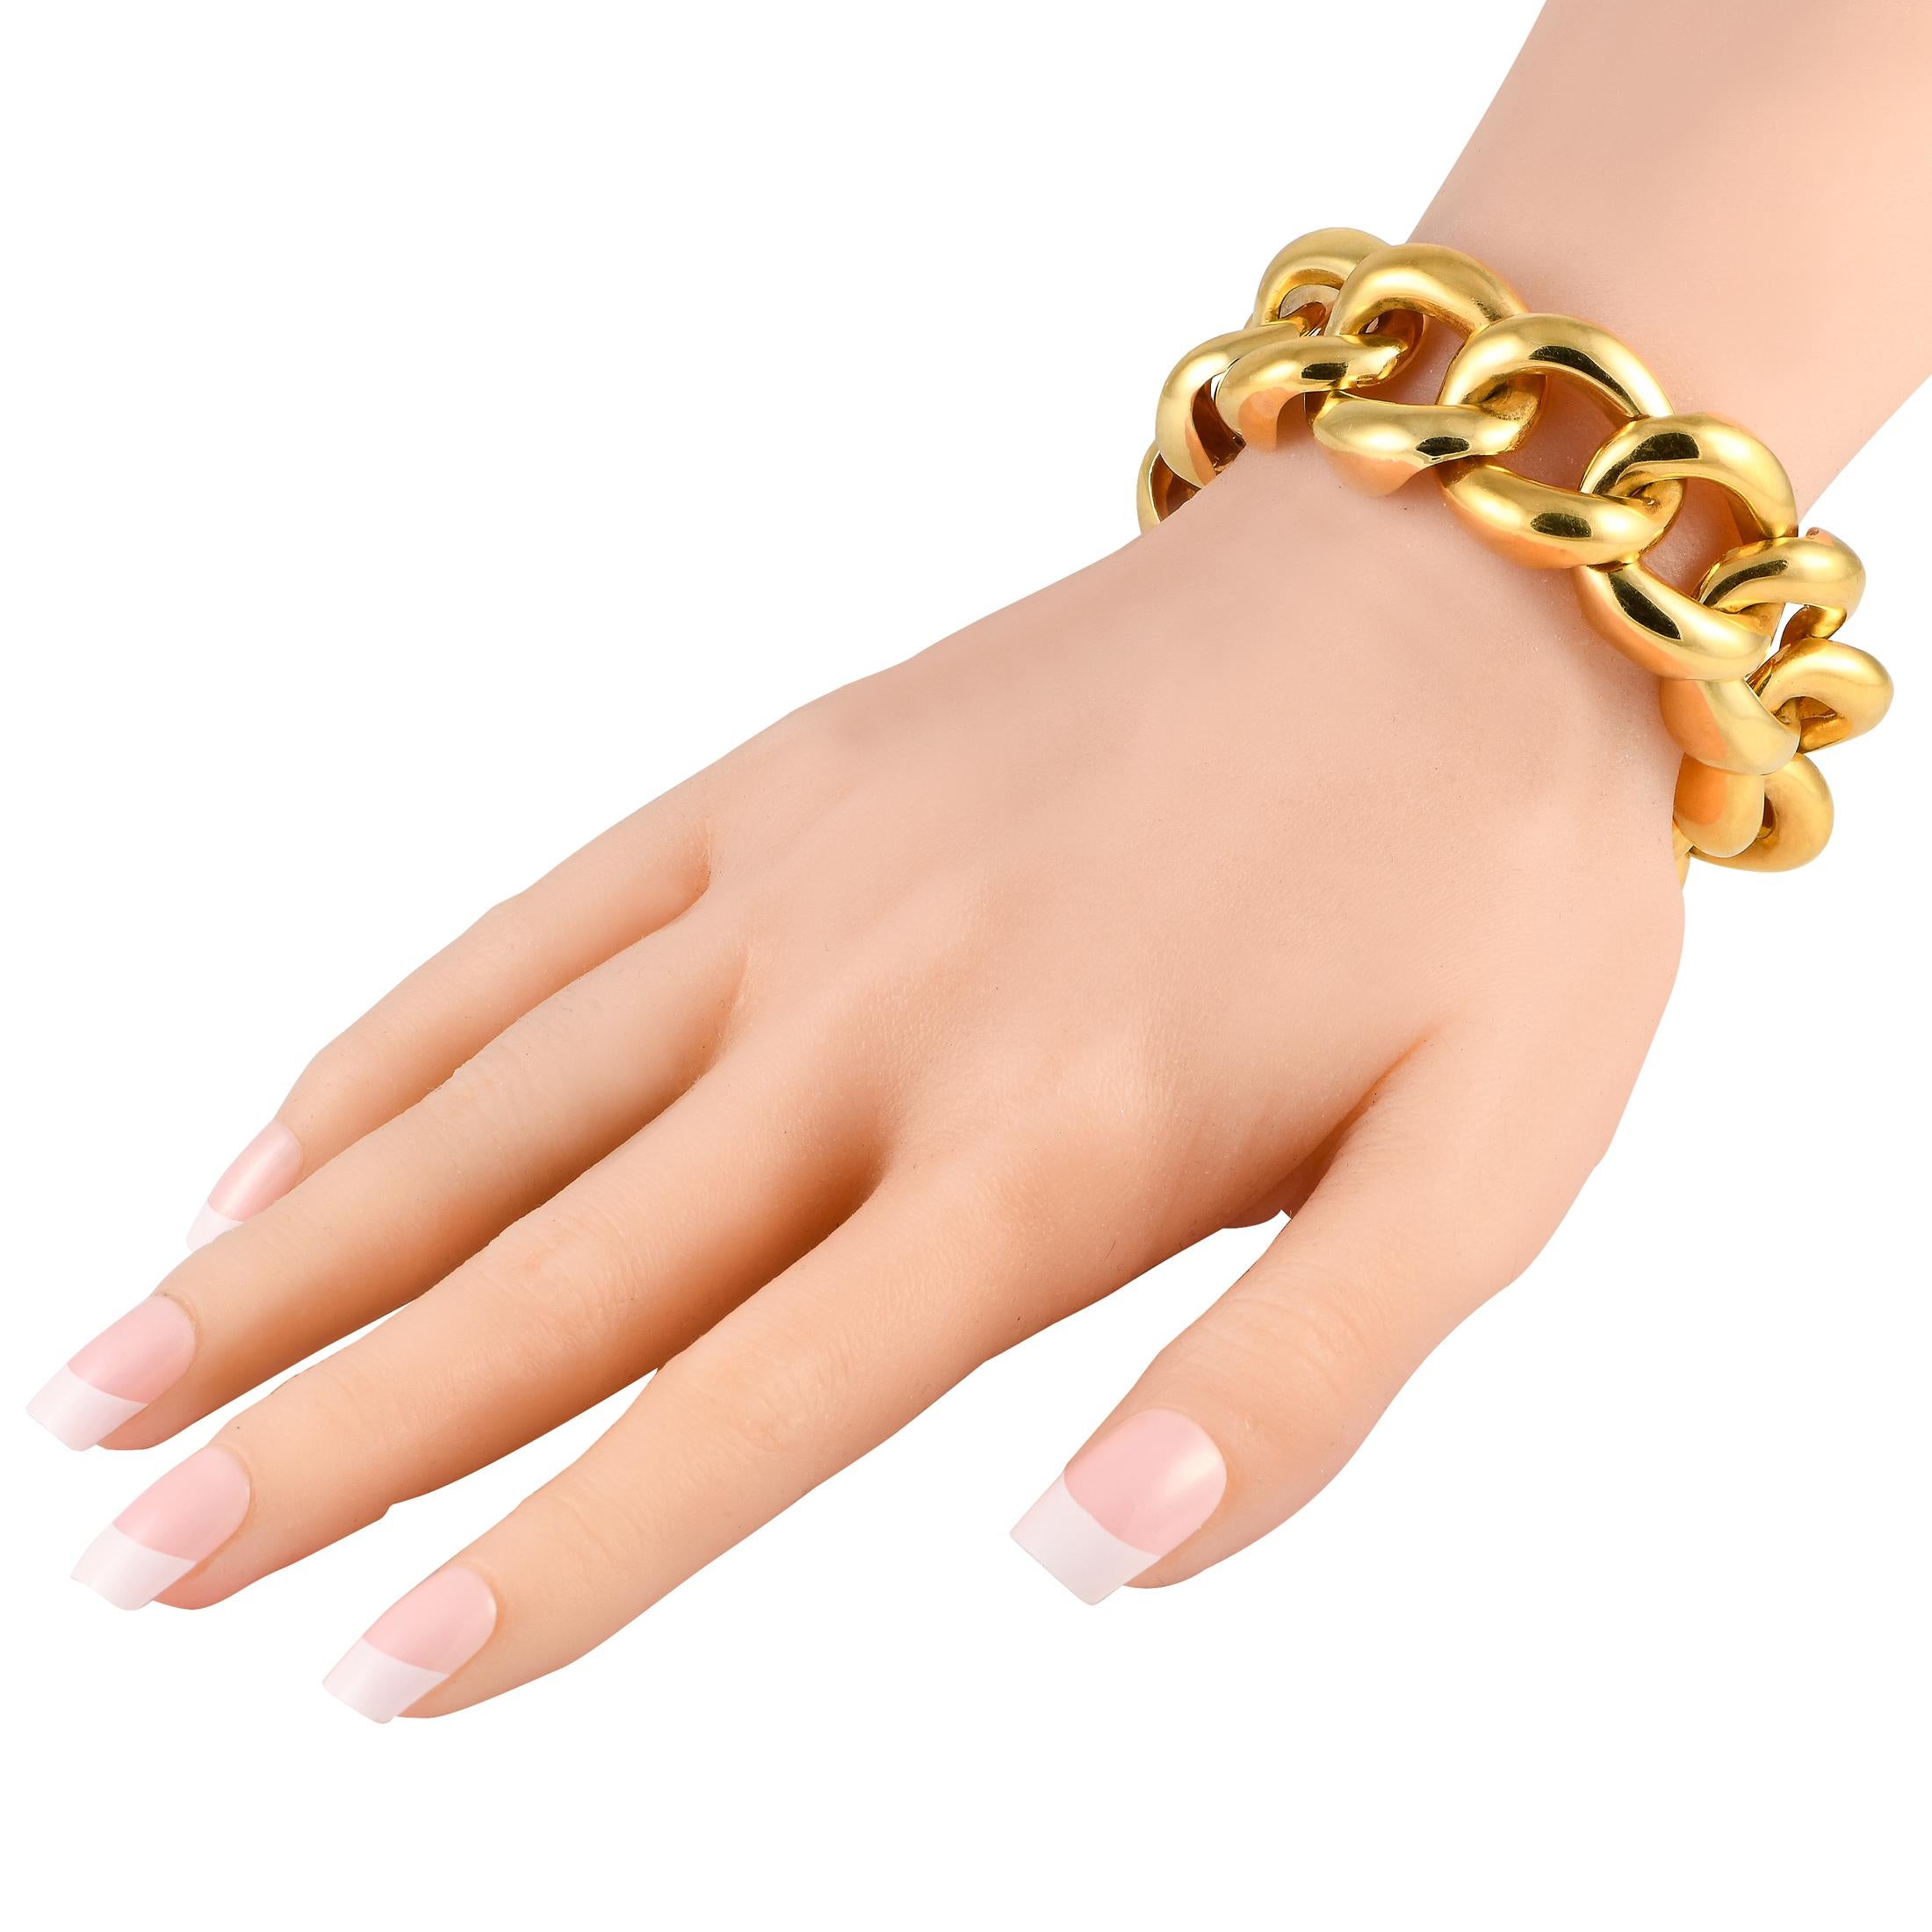 This weighty and extra-chunky chain link bracelet in solid 18K yellow gold delivers its style statement with an unshakeable sense of confidence. It measures 8 long and has a secure hidden clasp. Each link comes with a smooth and glossy polished